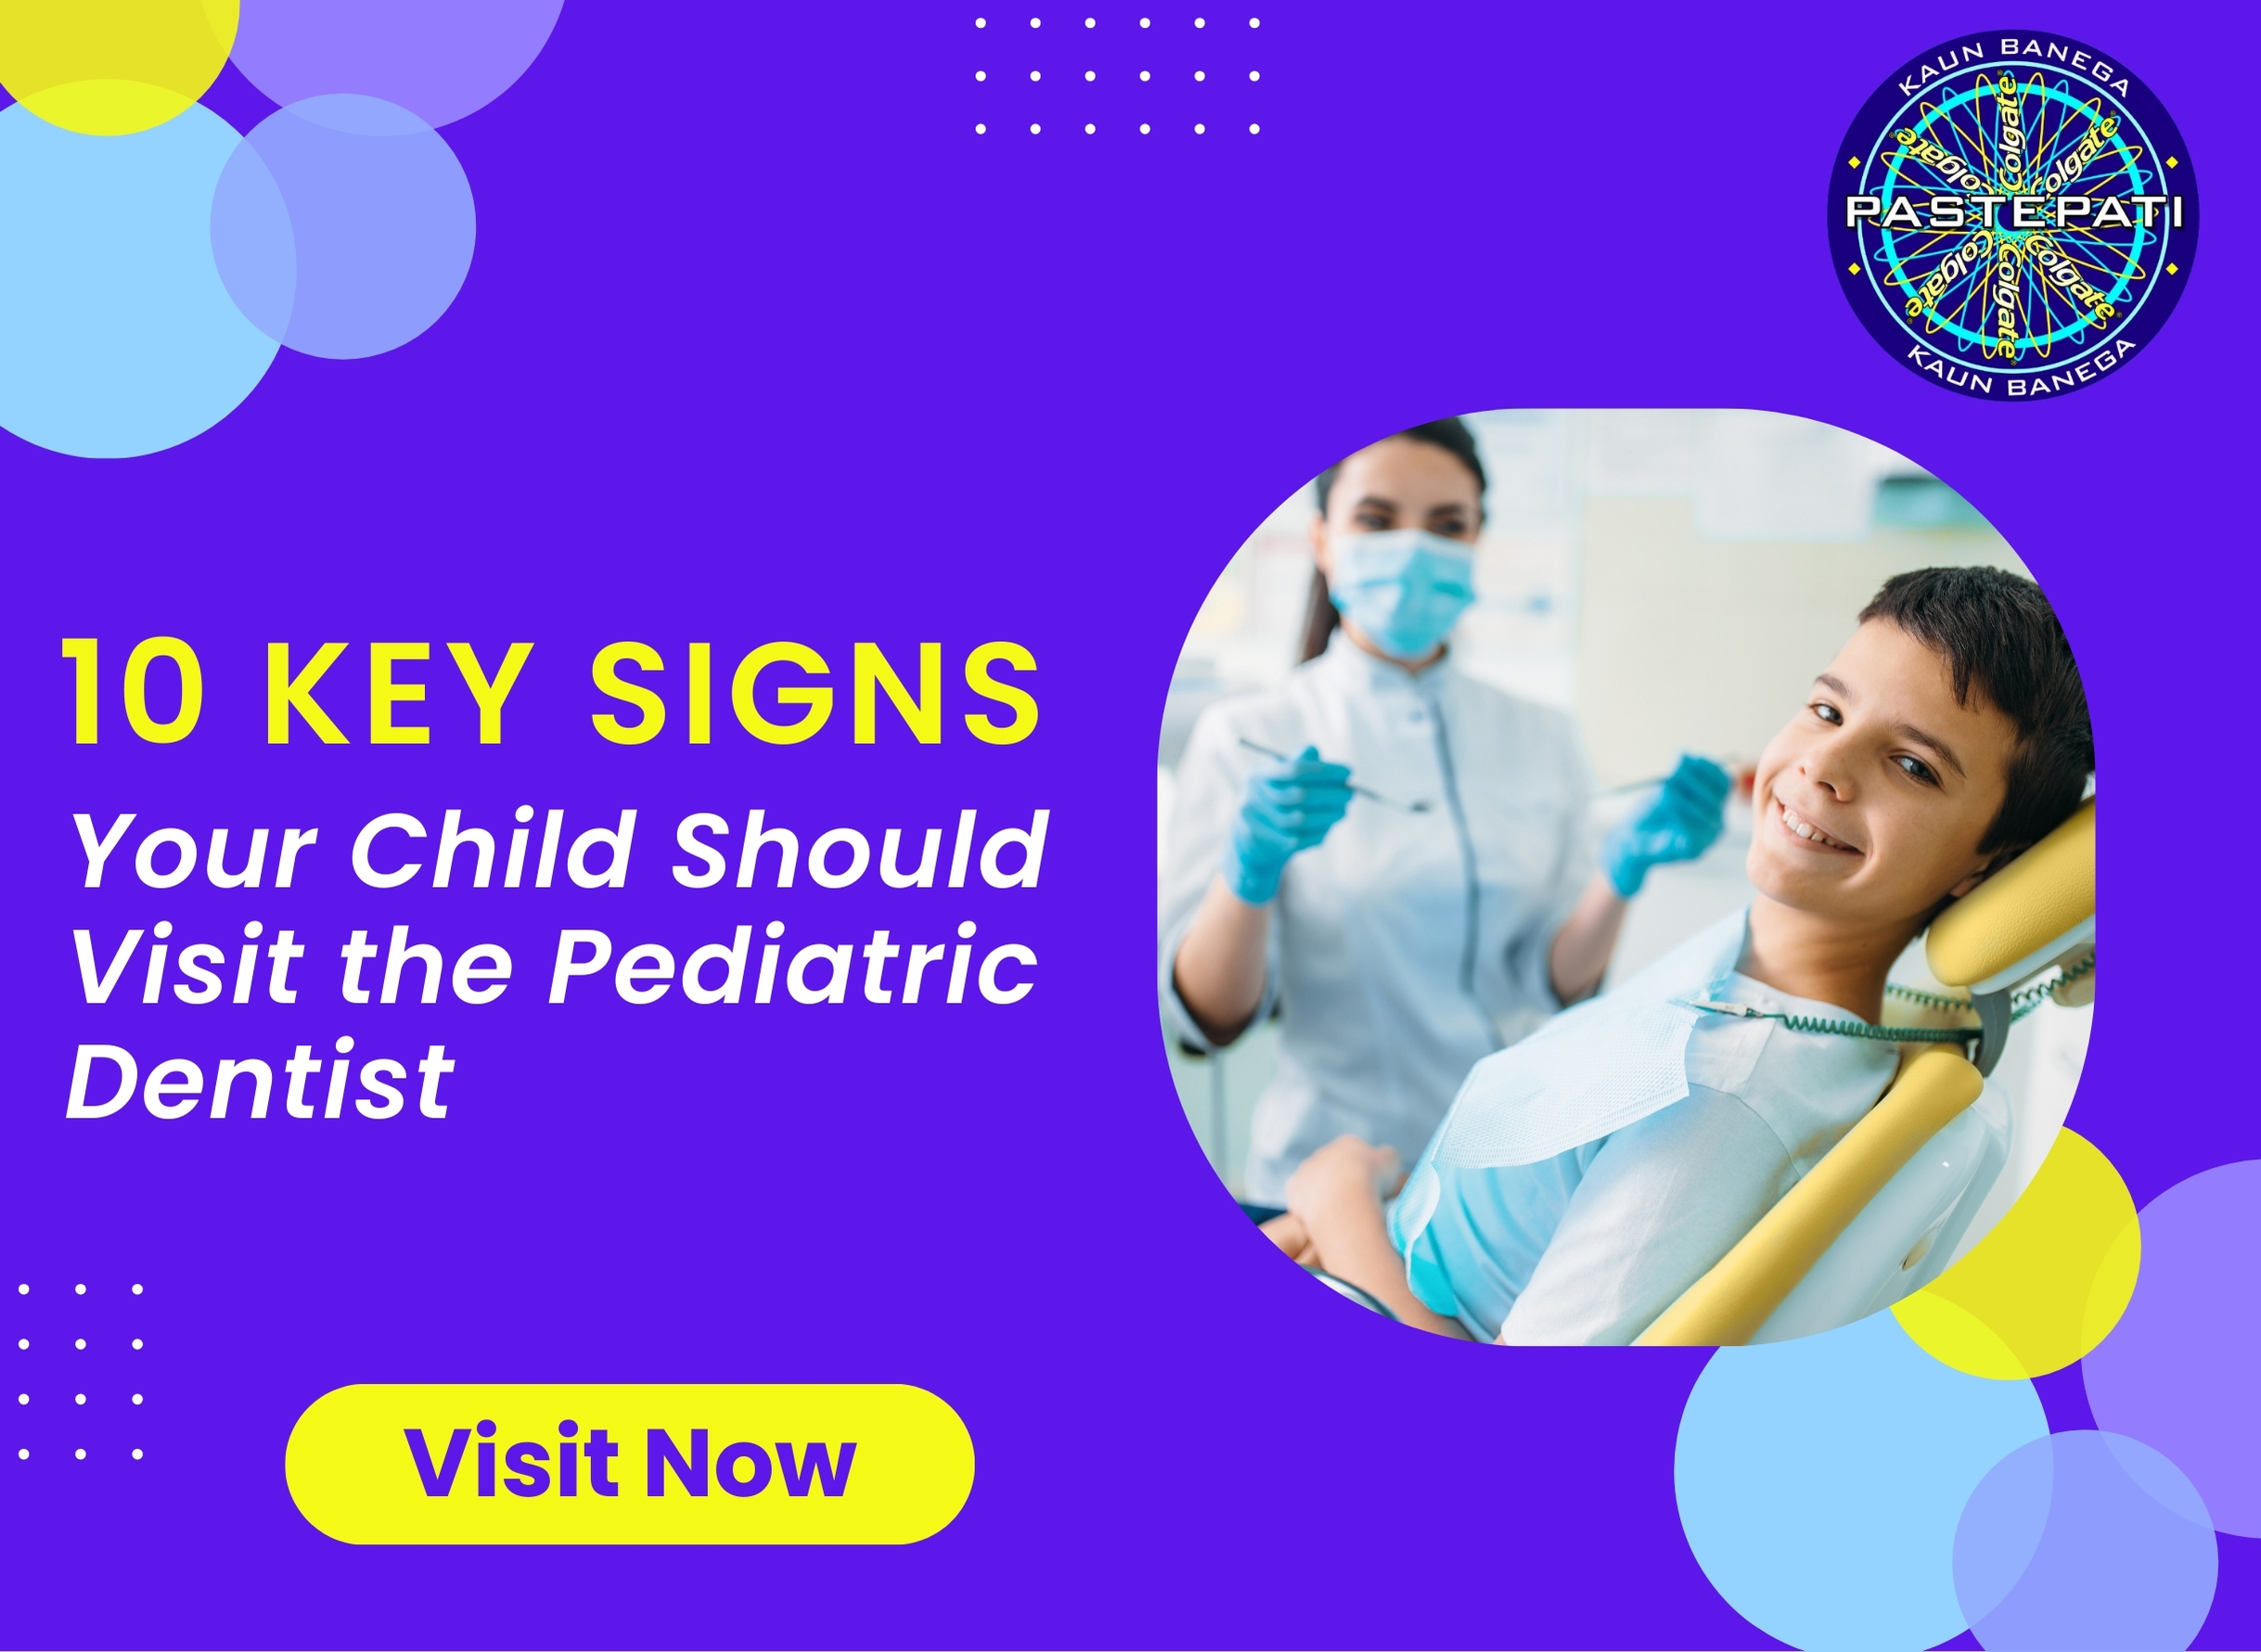 10 Key Signs Your Child Should Visit the Pediatric Dentist